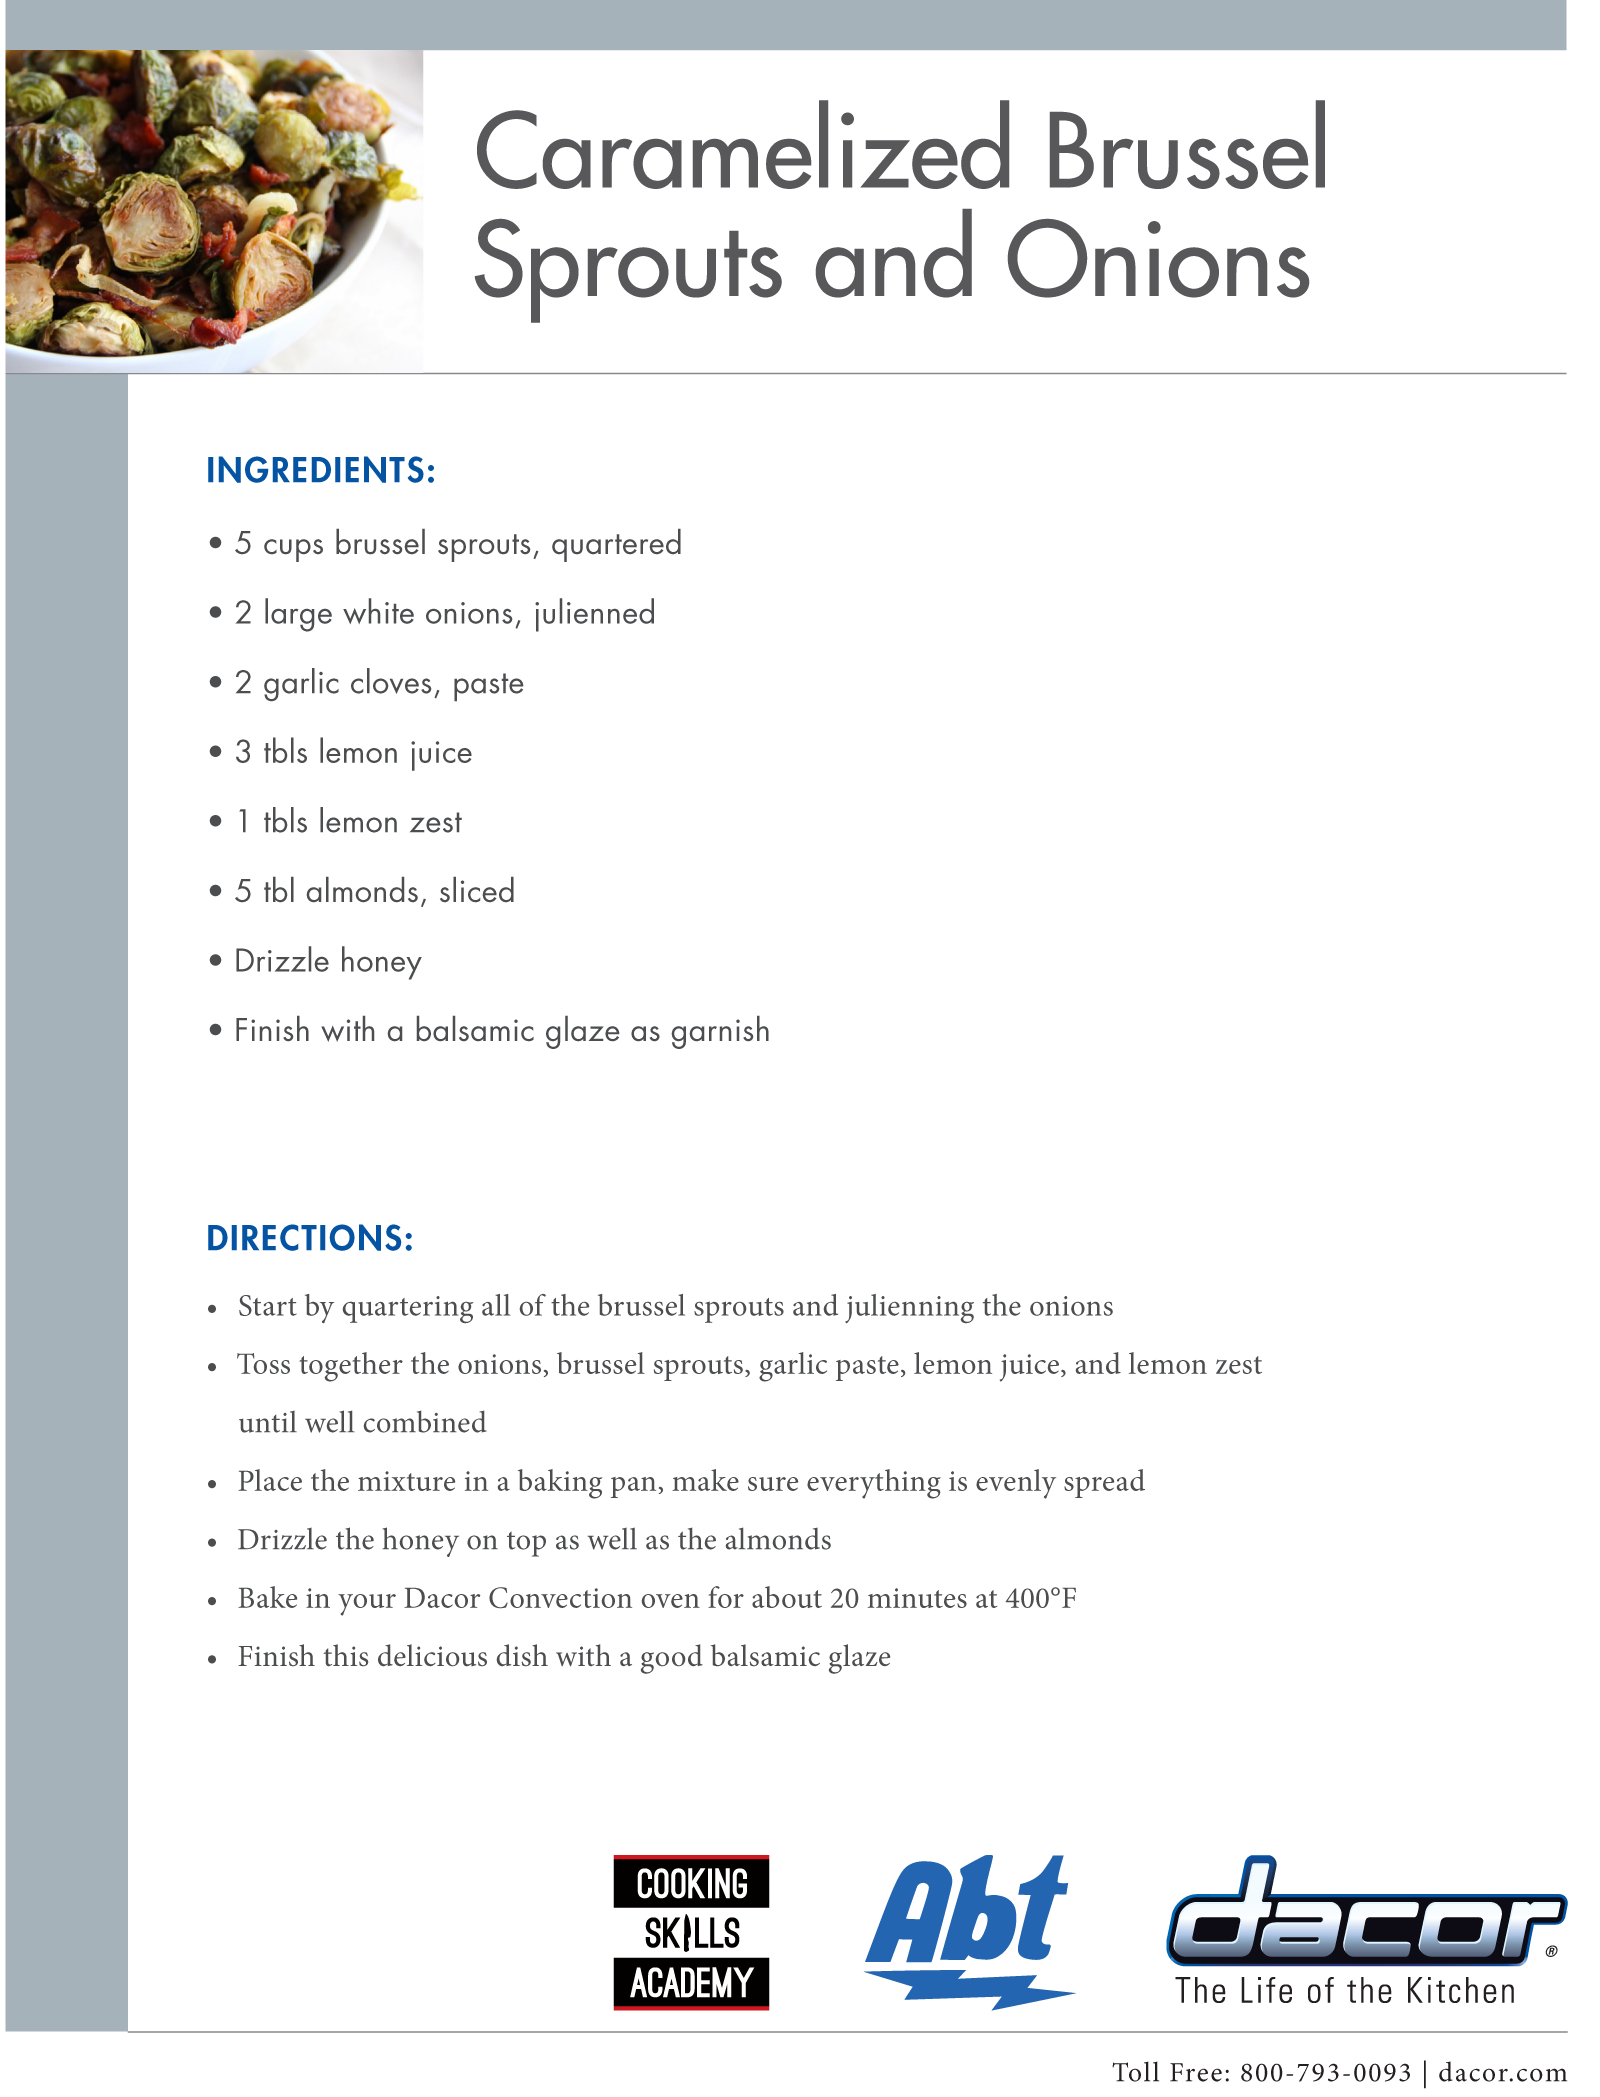 instructions for caramelized brussels sprouts recipe from Dacor